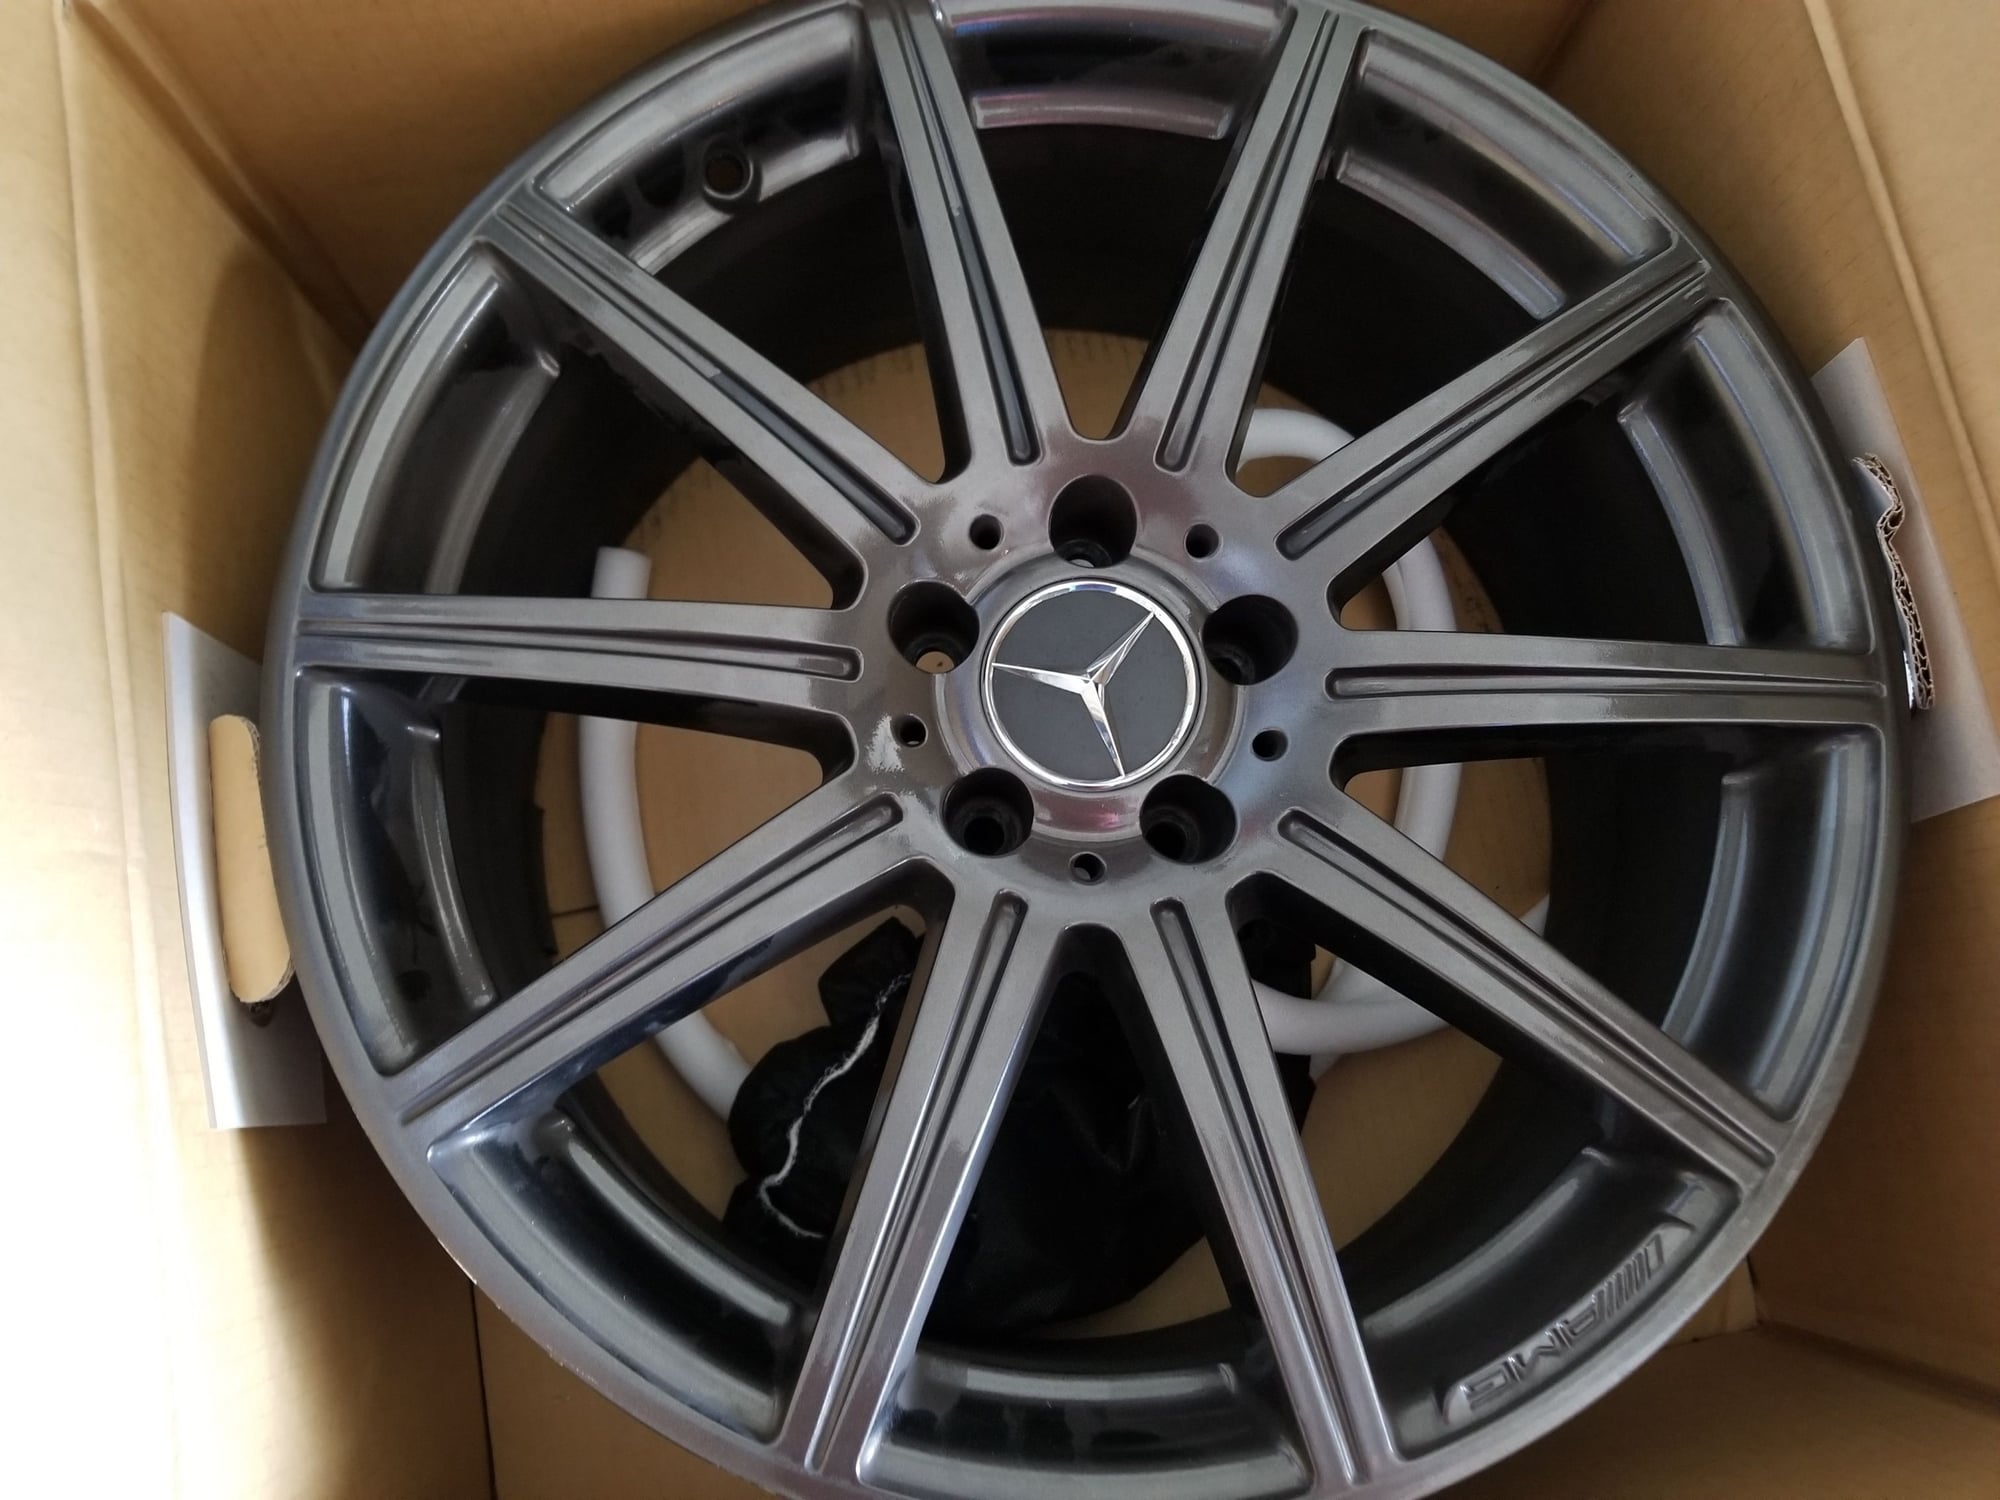 Wheels and Tires/Axles - WHEELS 2014 E 63 AMG S - Used - 2014 to 2015 Mercedes-Benz E63 AMG S - Boise, ID 83713, United States